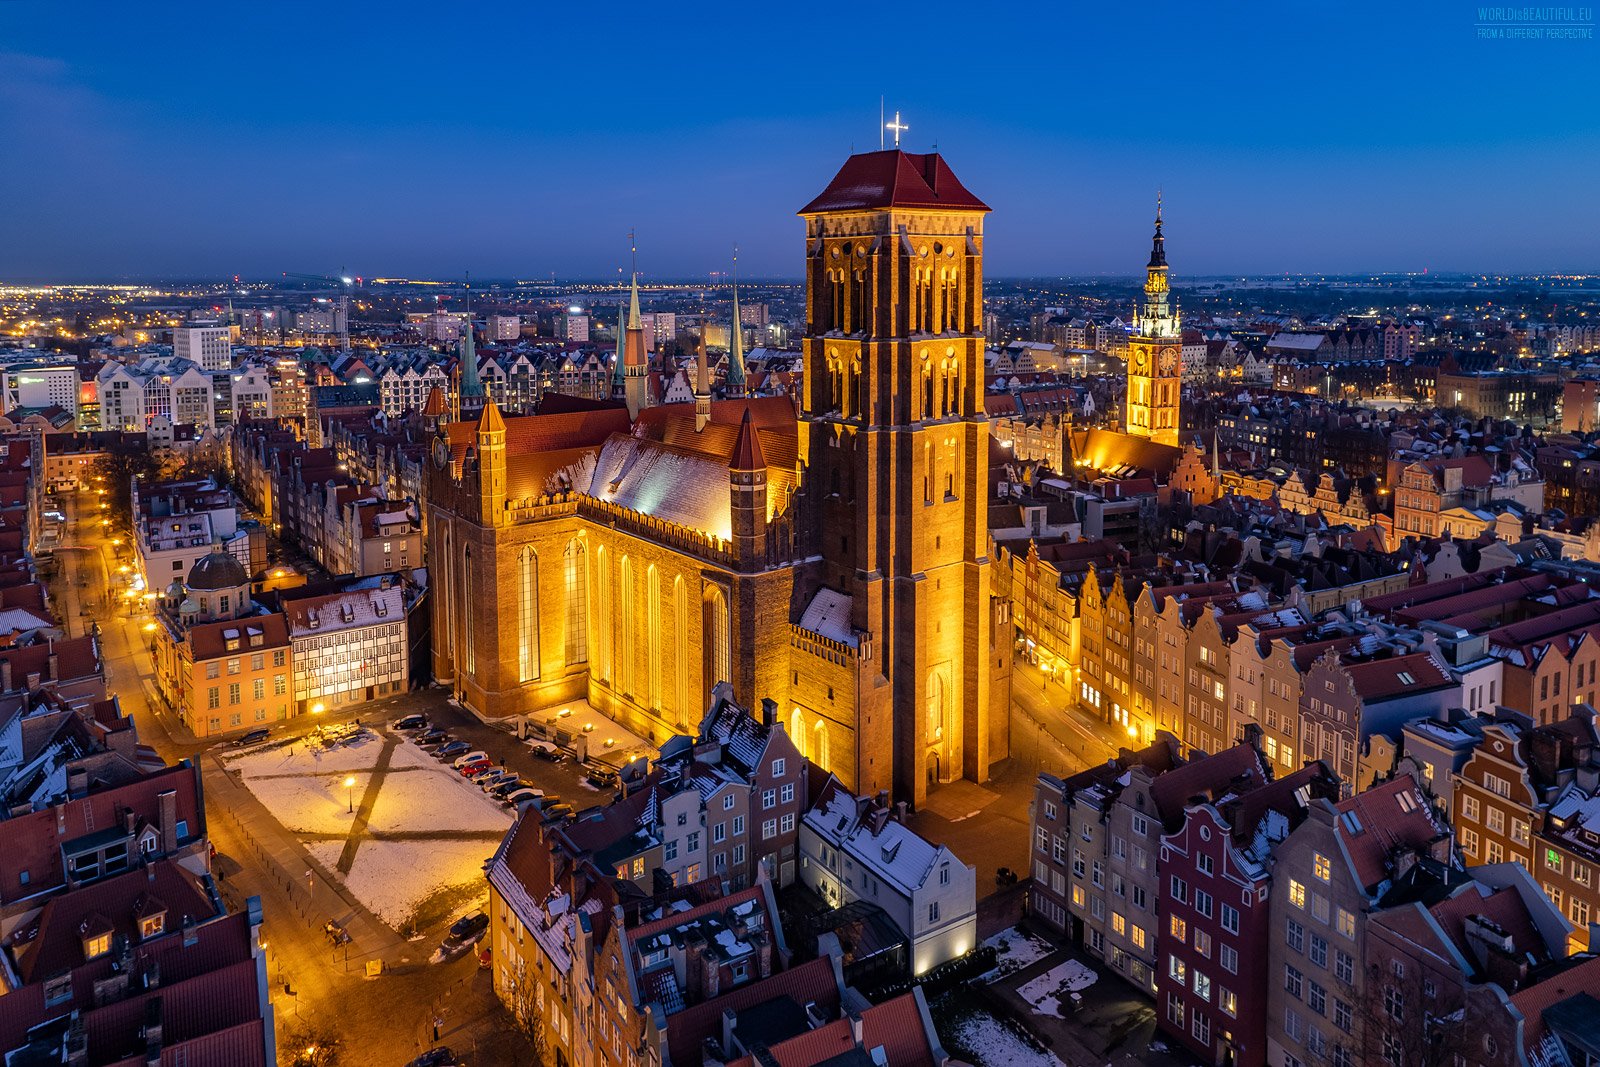 Gdansk - photos from the drone